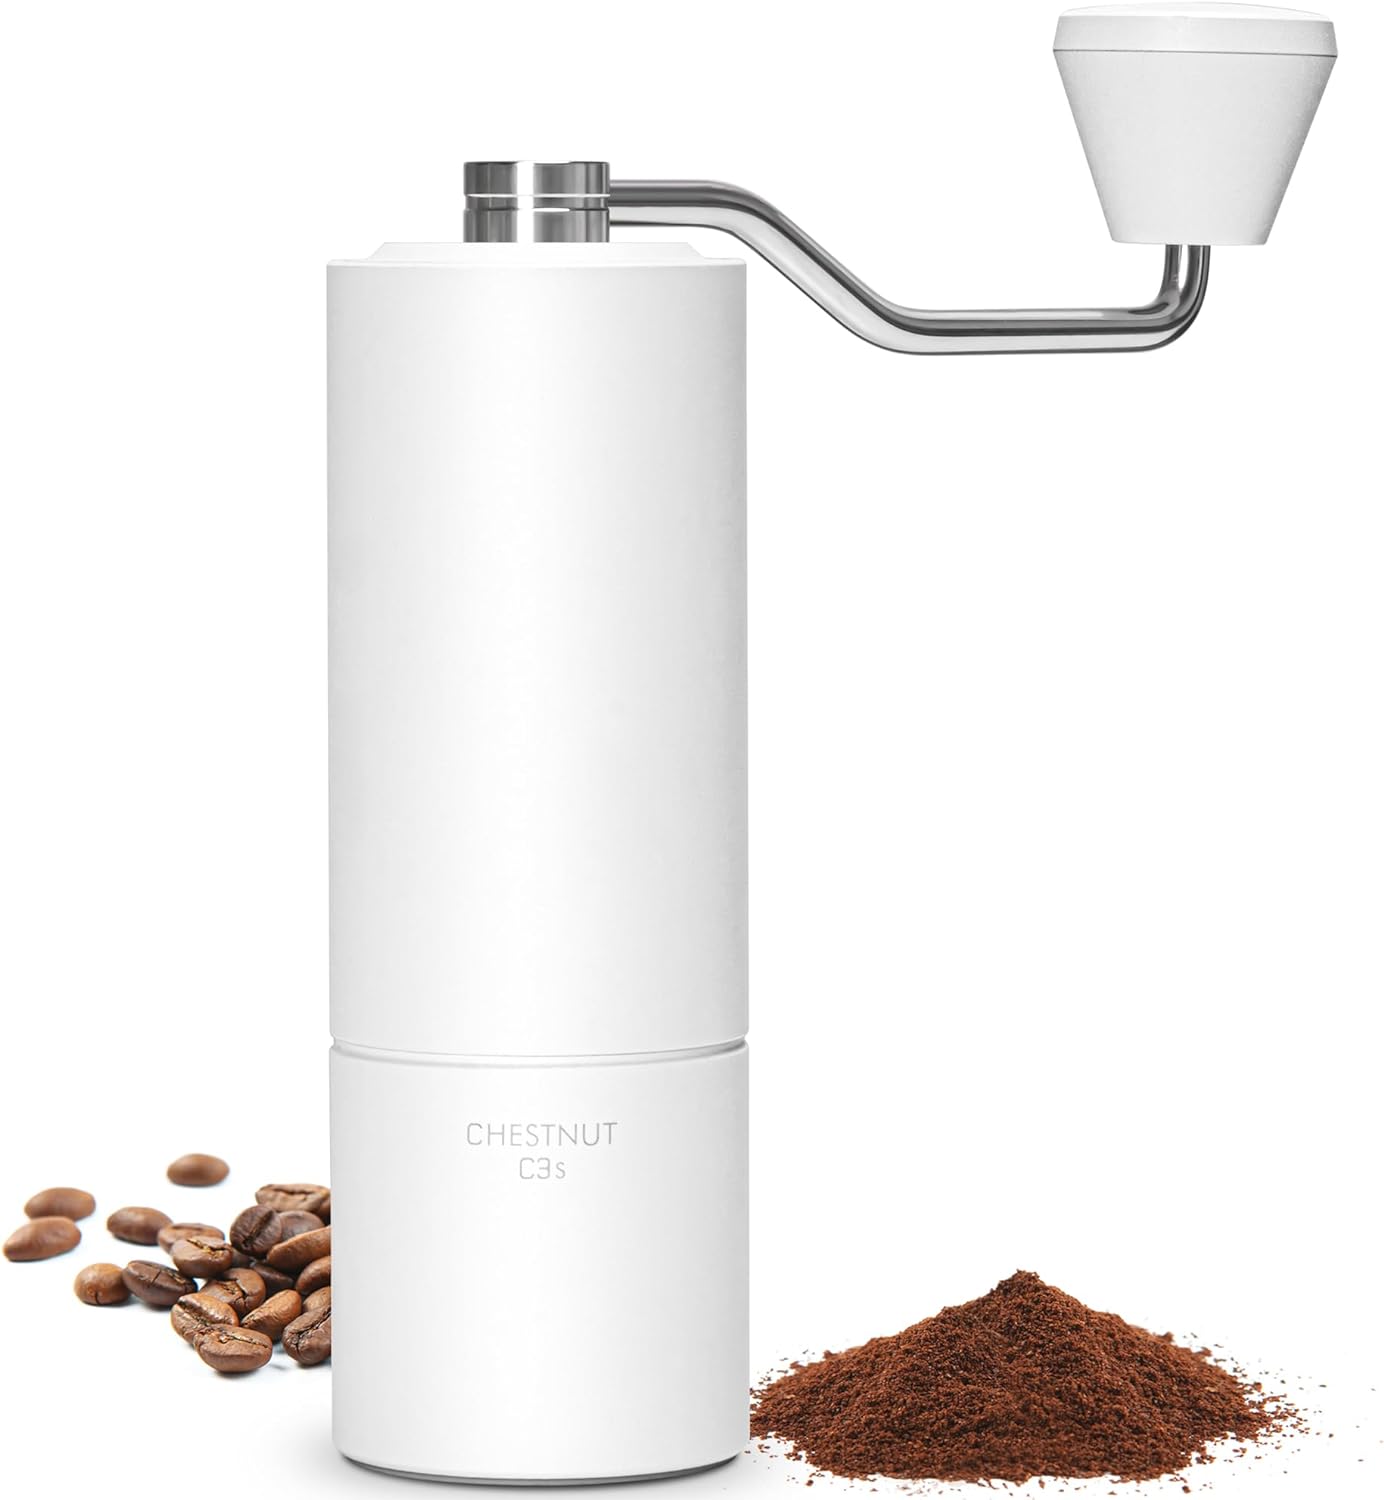 TIMEMORE Chestnut C3S Manual Coffee Grinder: The Perfect Brewing Companion